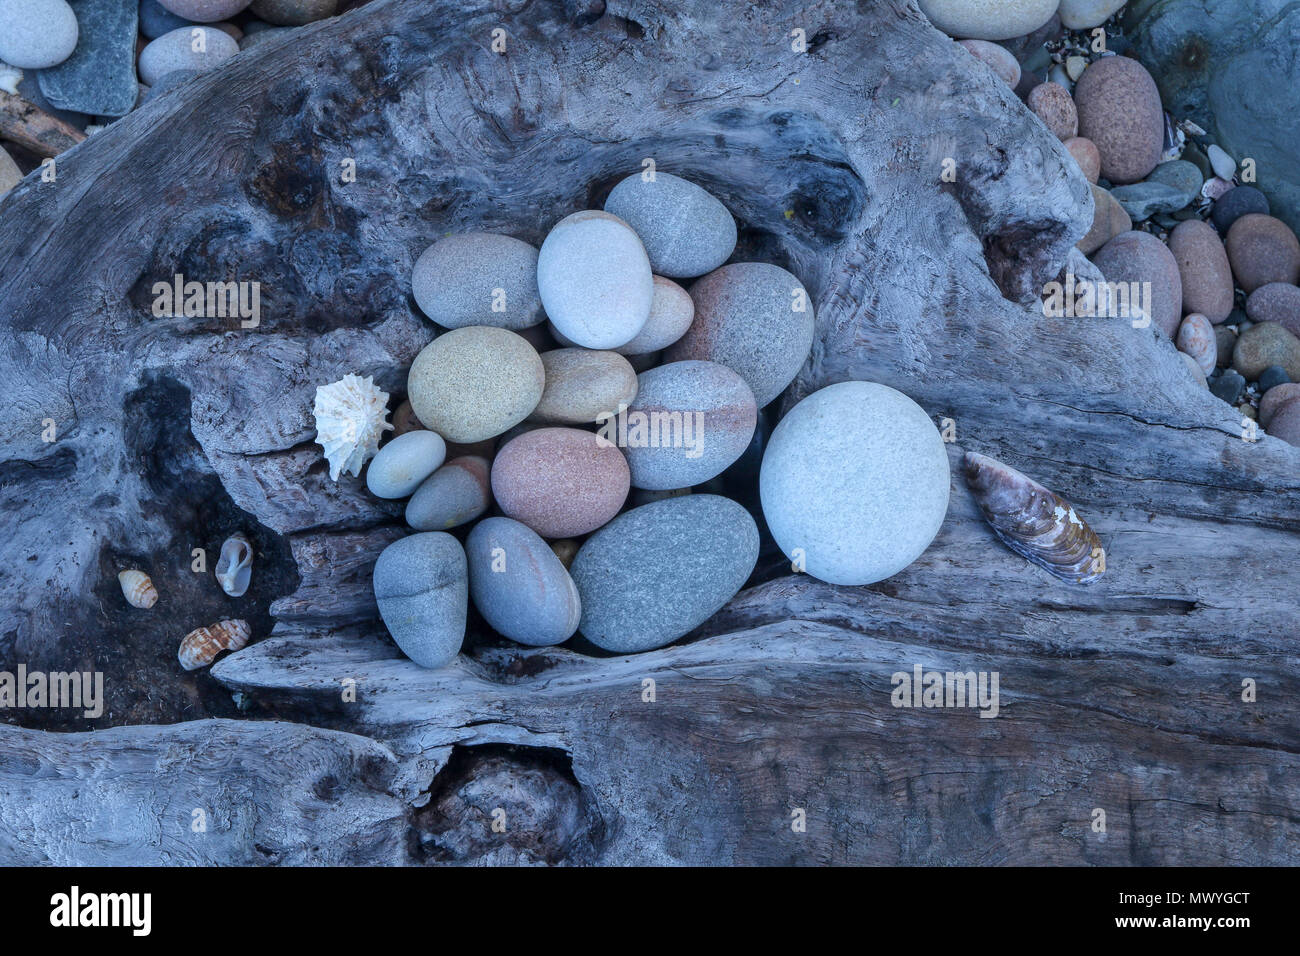 'Bowl' driftwood and pebbles on driftwood beach in the Tsitsikamma, protected area, Garden Route, Cape, South Africa Stock Photo